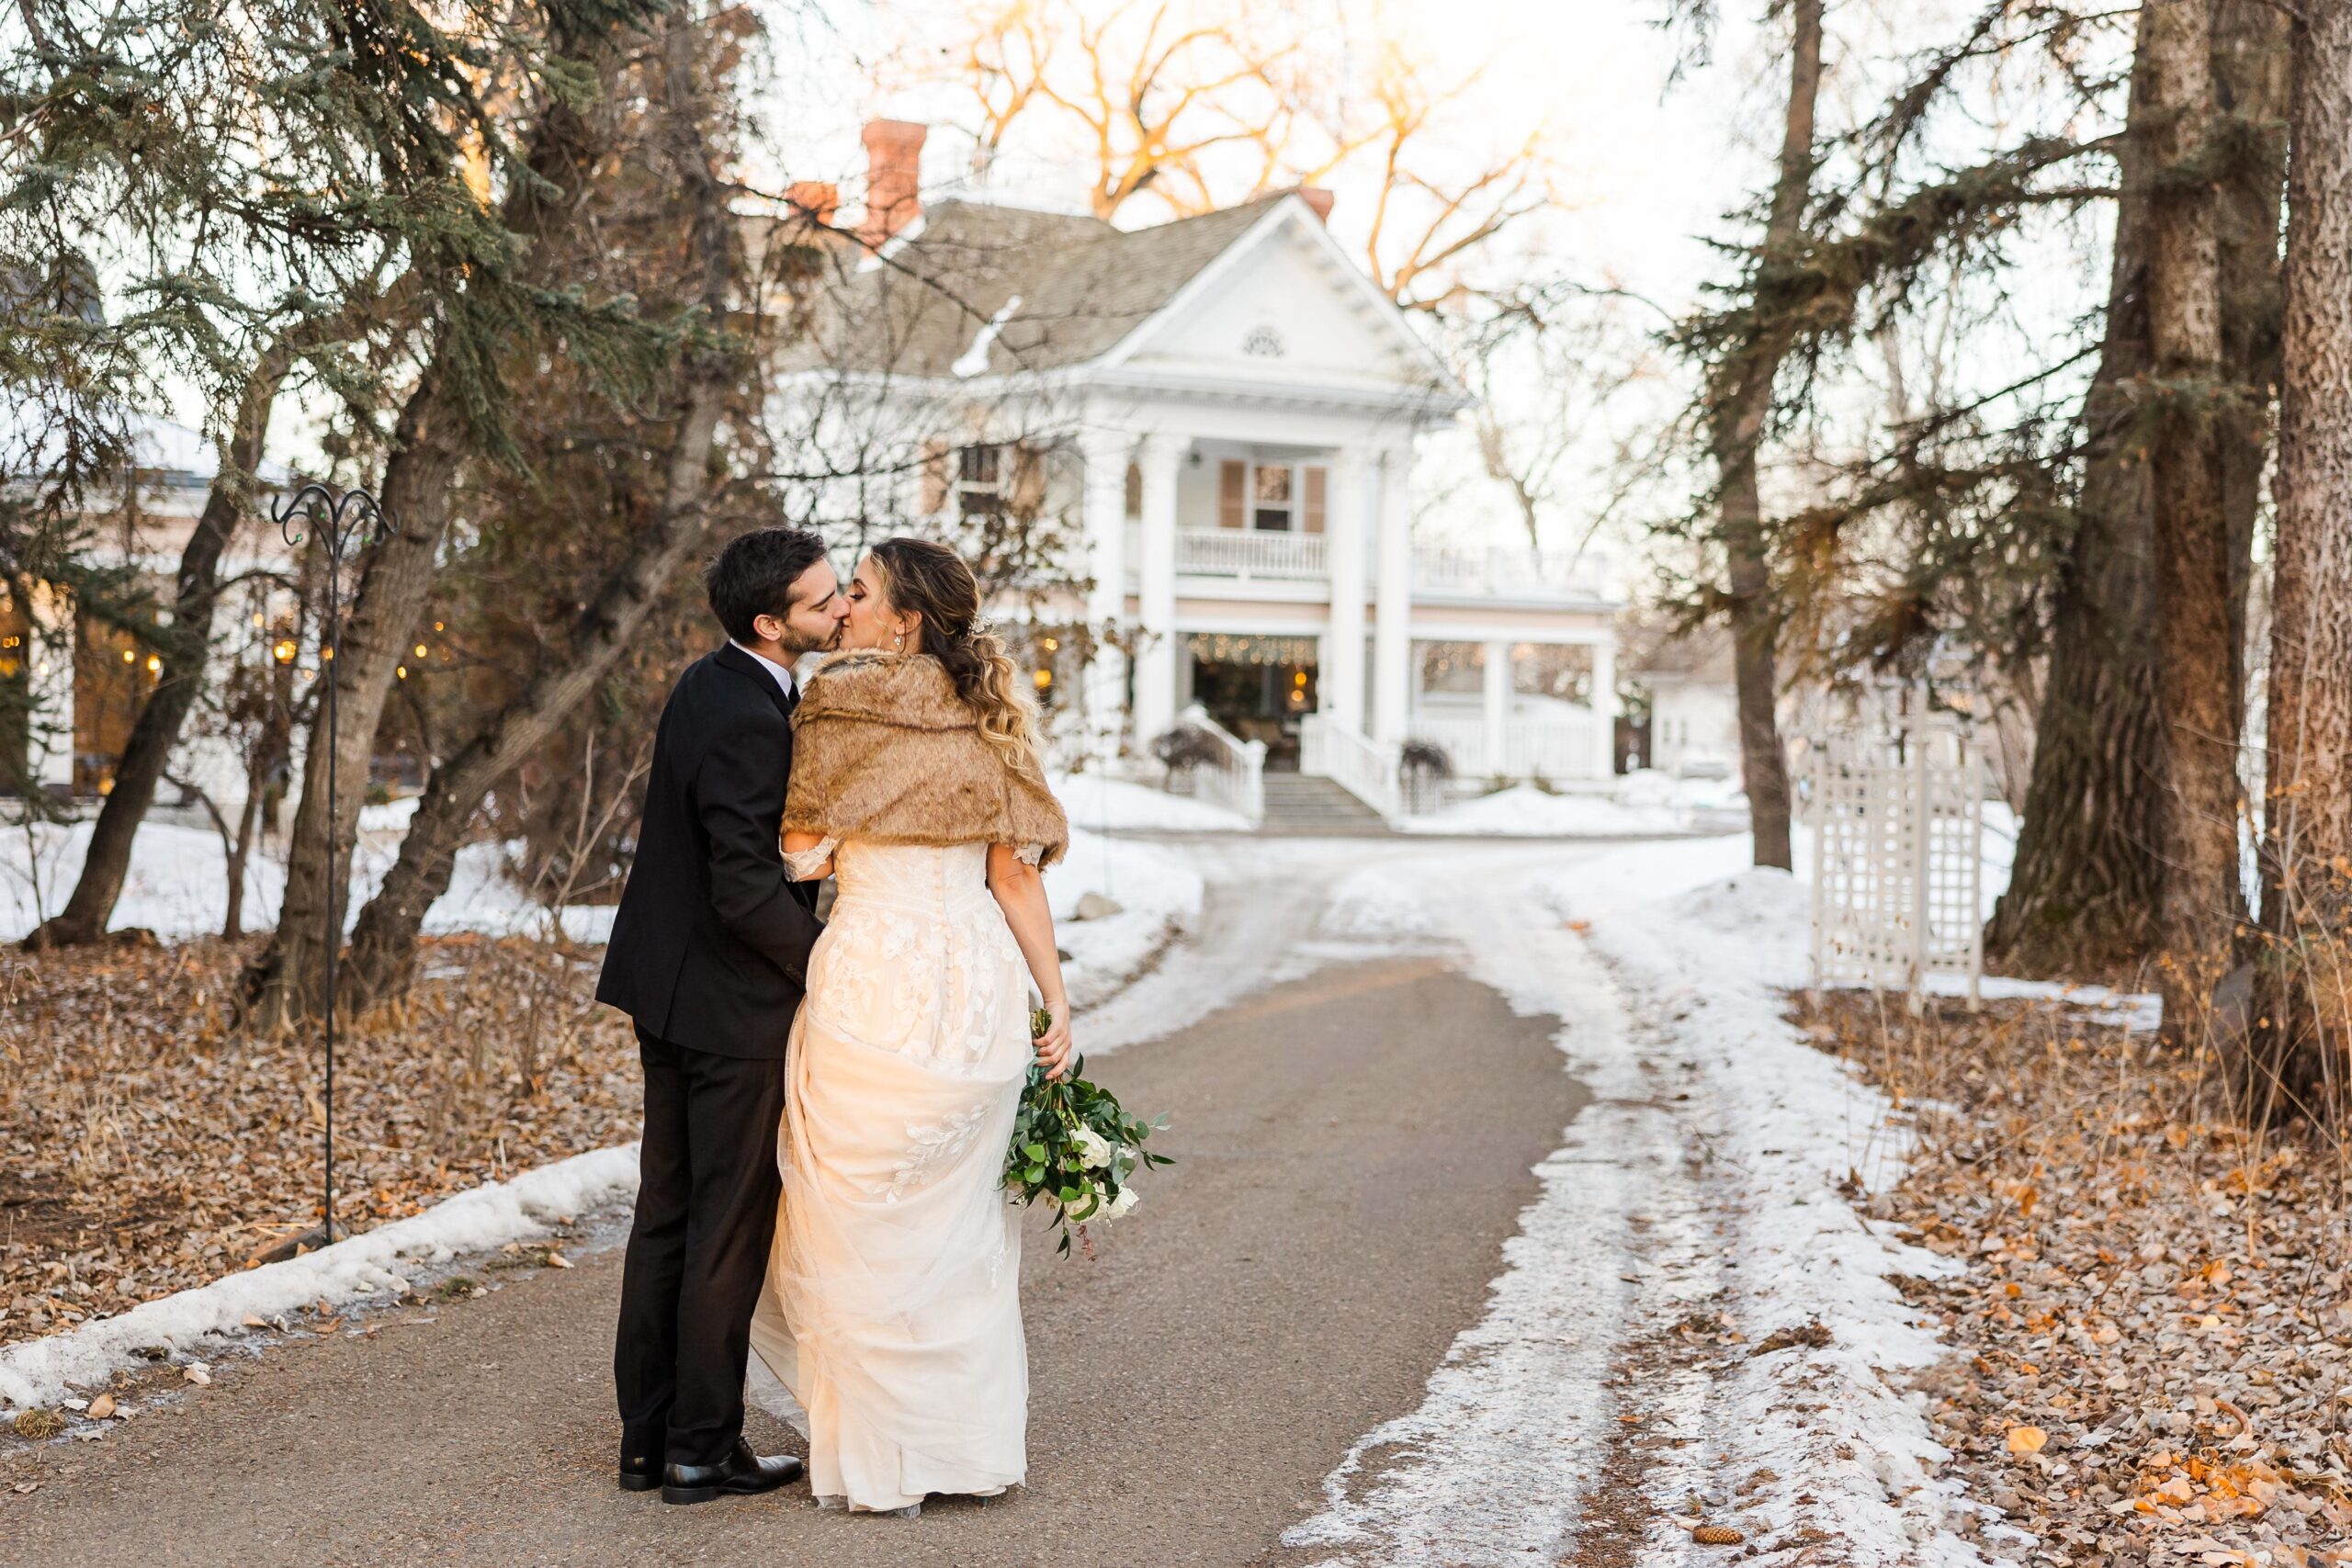 Brittany Anne Photography – Winter Wonderland at the Norland Historic Estate-16